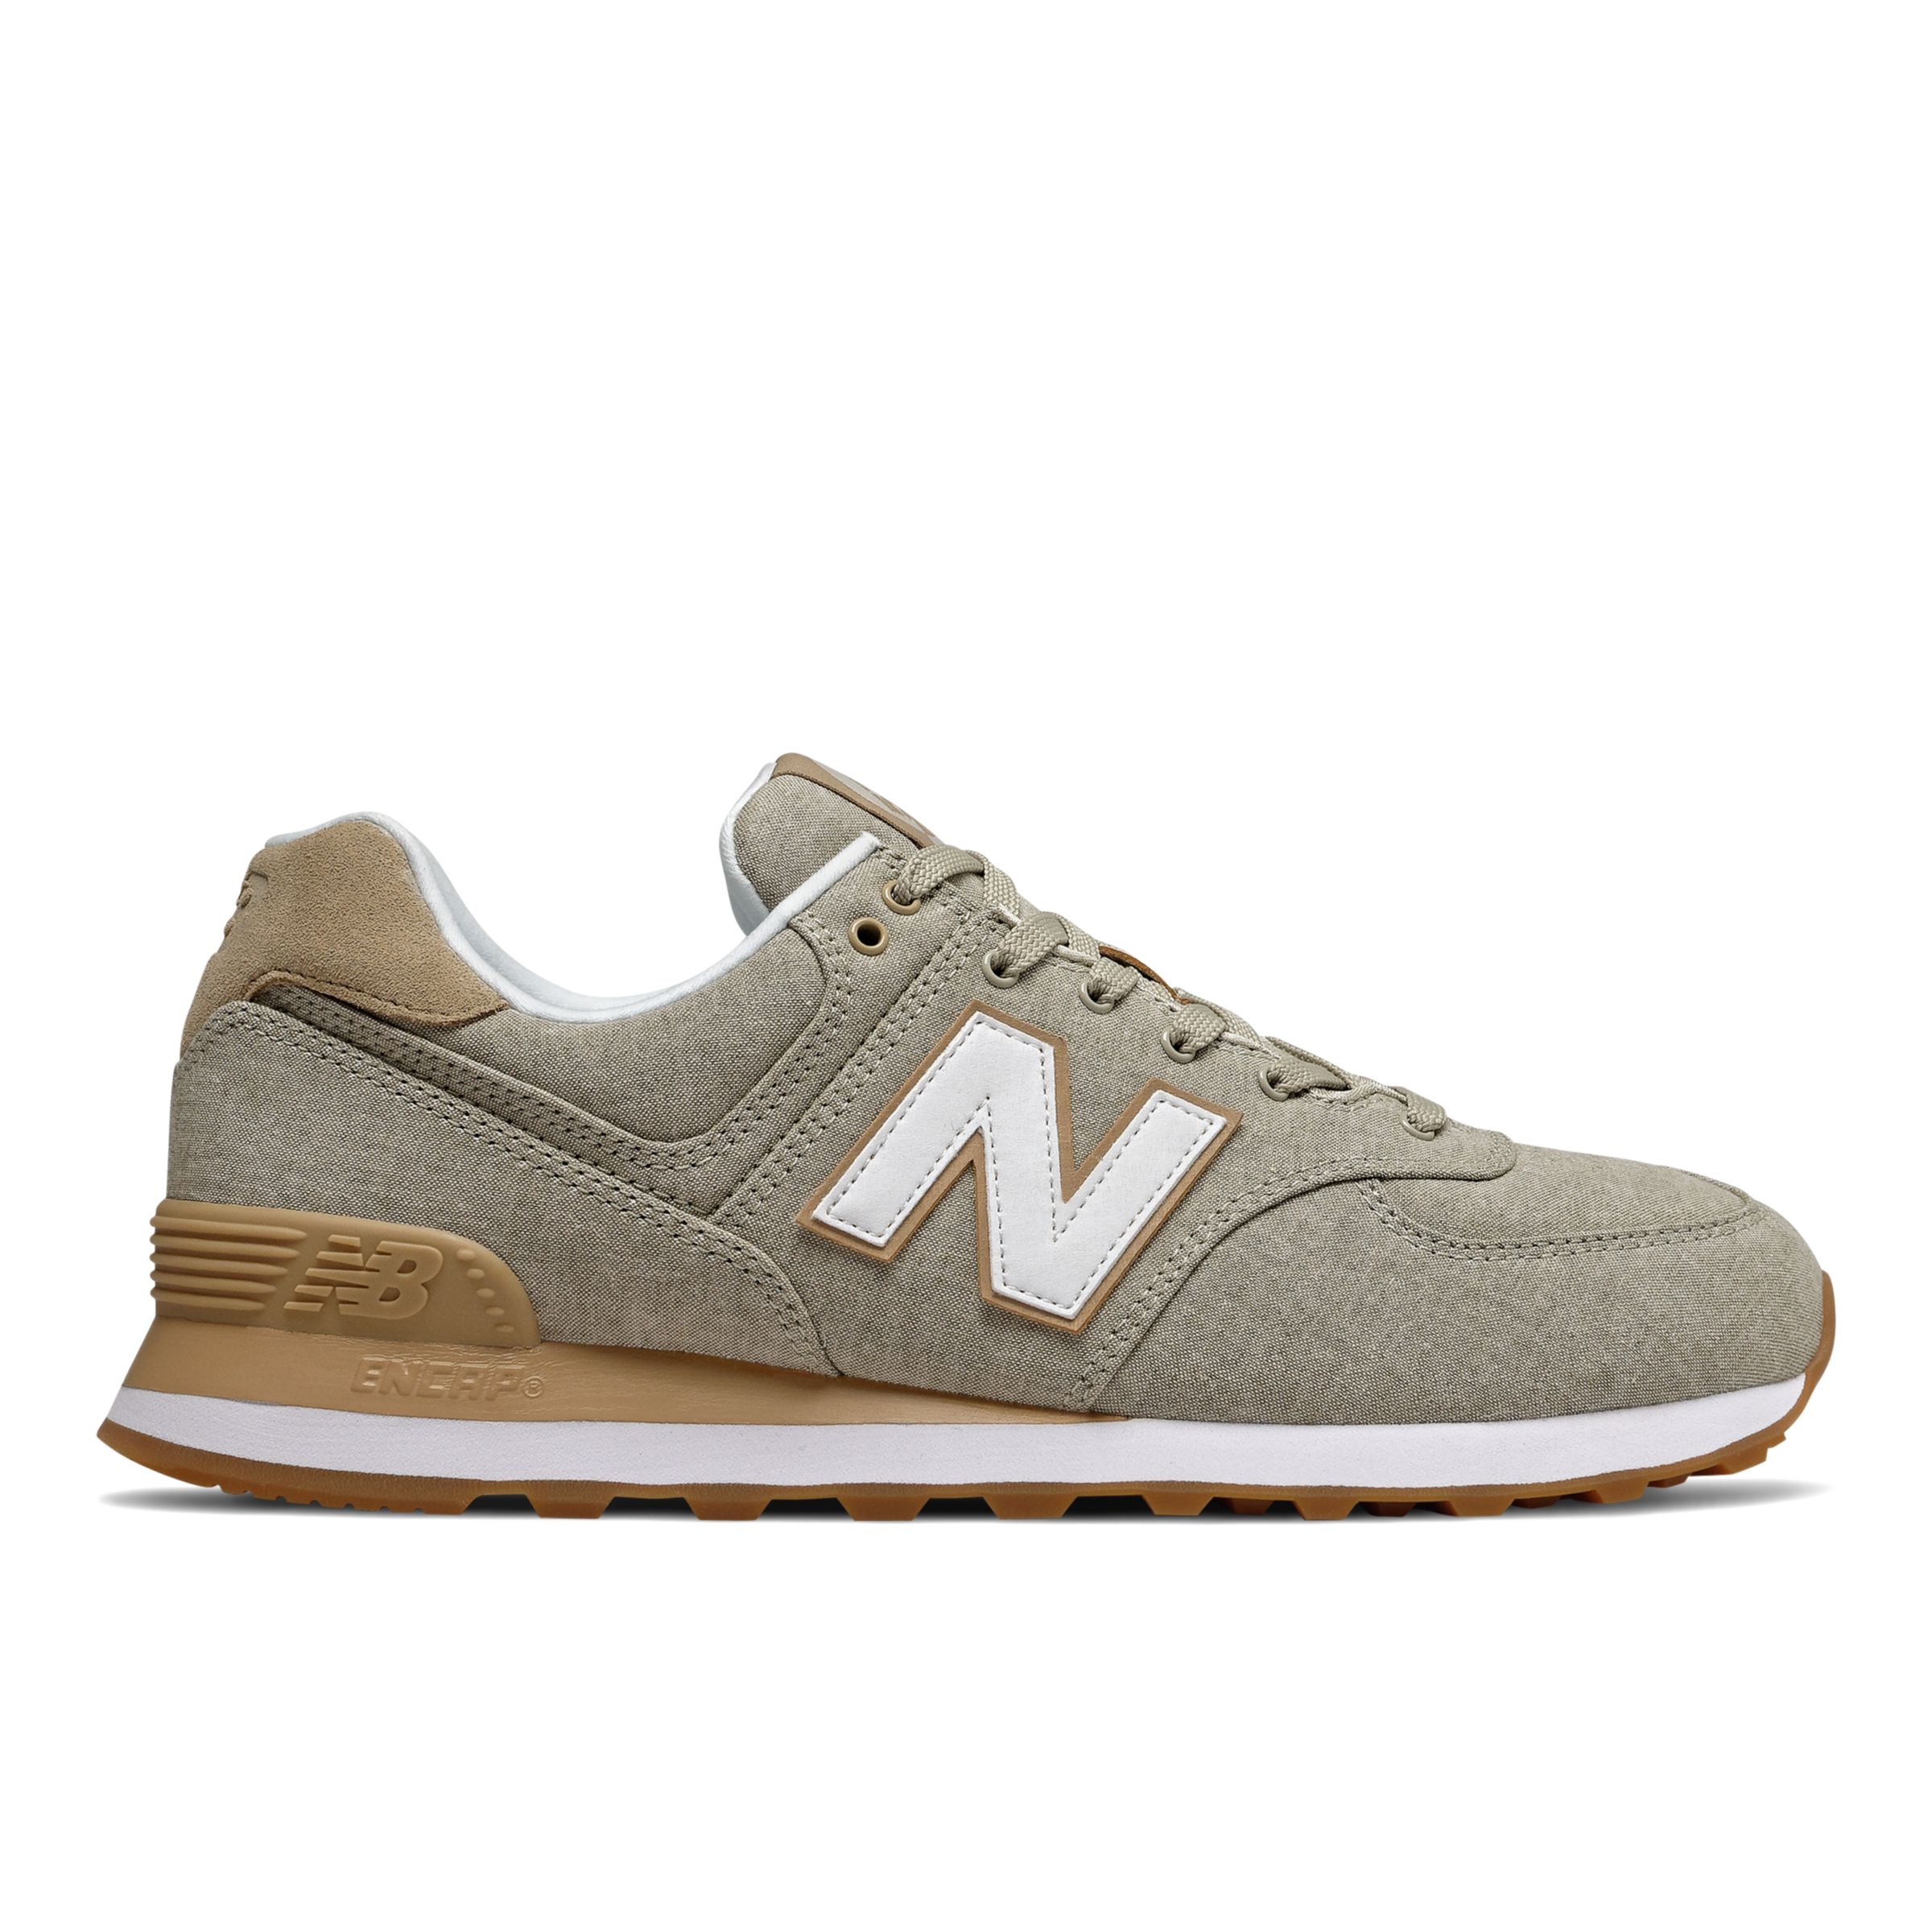 New Balance ML574V2-24956-M on Sale - Discounts Up to 57% Off on ML574STC  at Joe's New Balance Outlet